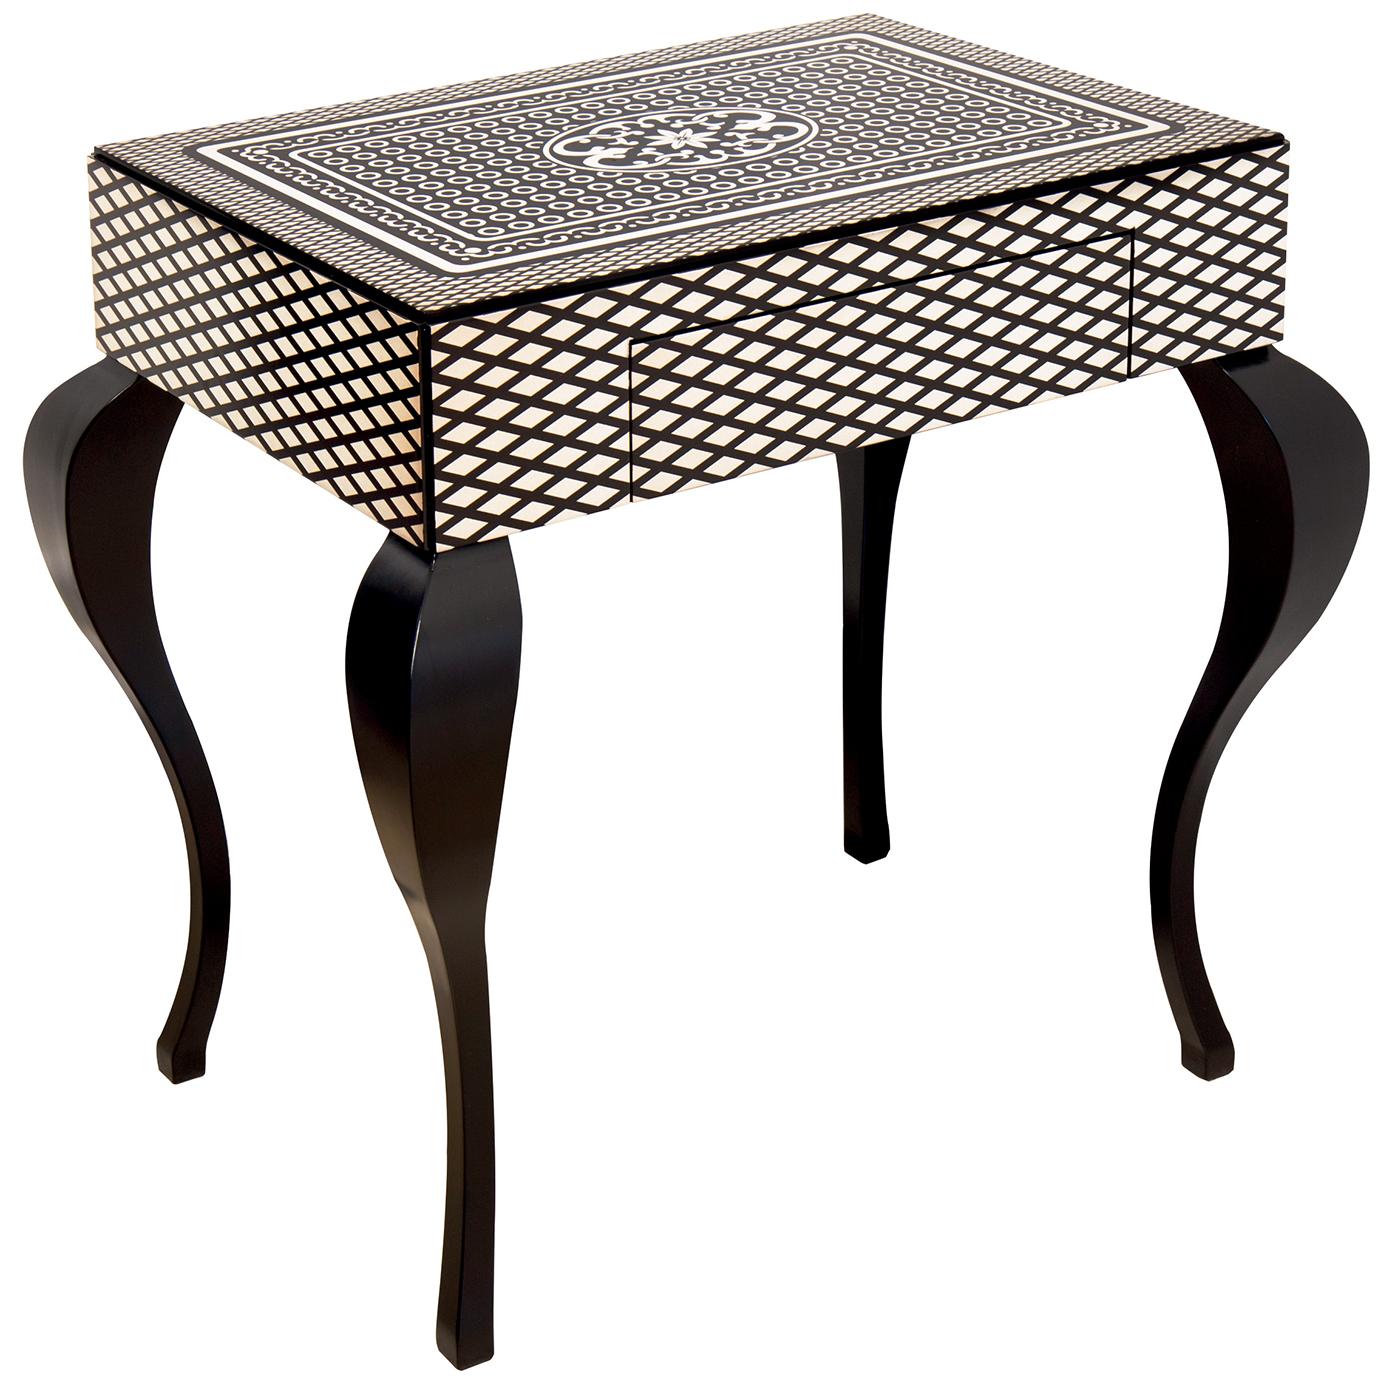 Entirely covered in a diamond-shaped pattern, this splendid side table will make a statement in an eclectic, mid-century-inspired and modern living room or entryway, especially when matched to the console of the same Terramia Collection. Resting on